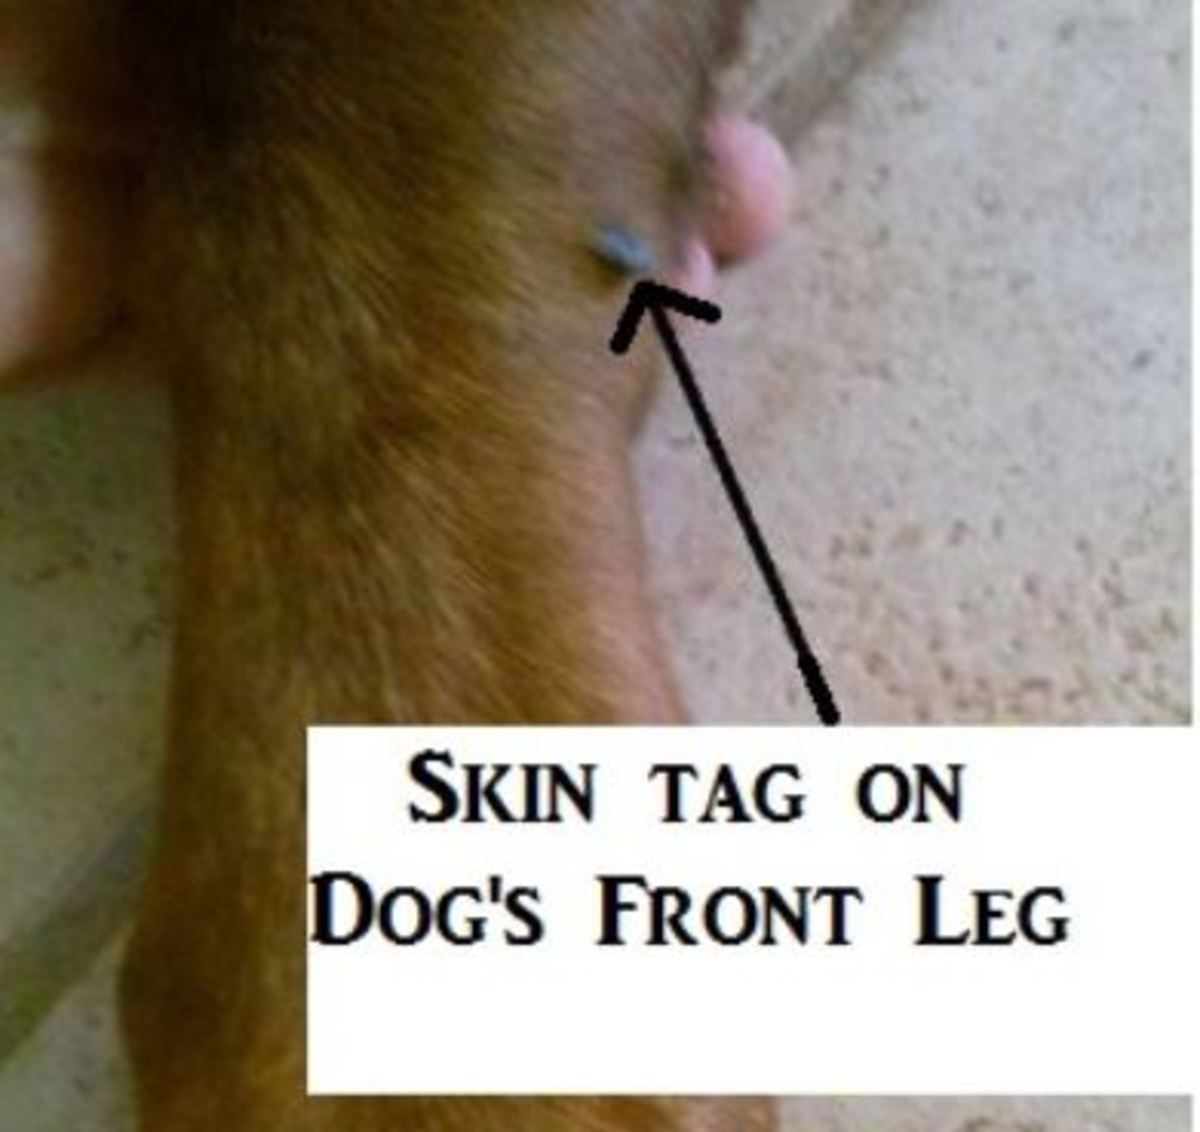  Picture of skin tag on dog's leg, all rights reserved, do not copy.